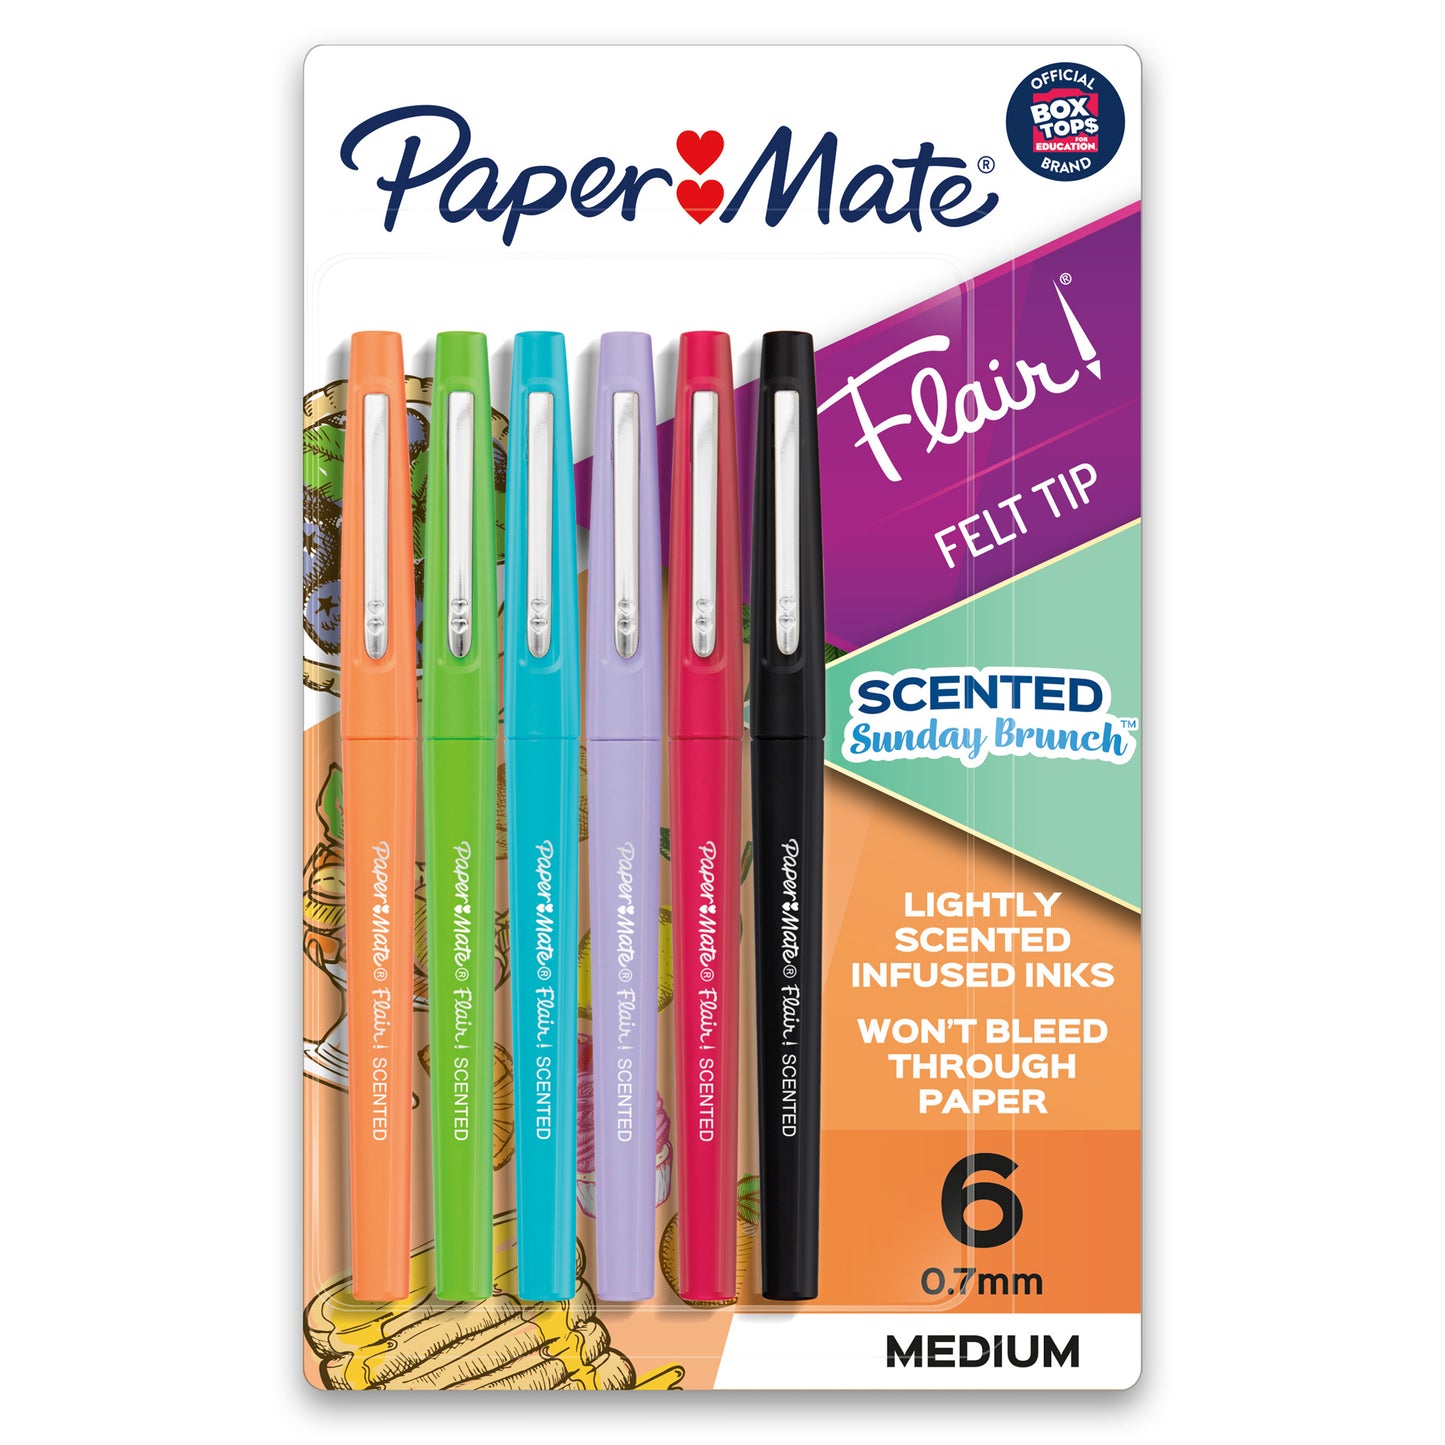 Flair, Scented Felt Tip Pens, Assorted Sunday Brunch Scents & Colors, 0.7mm, 6 Per Pack, 2 Packs